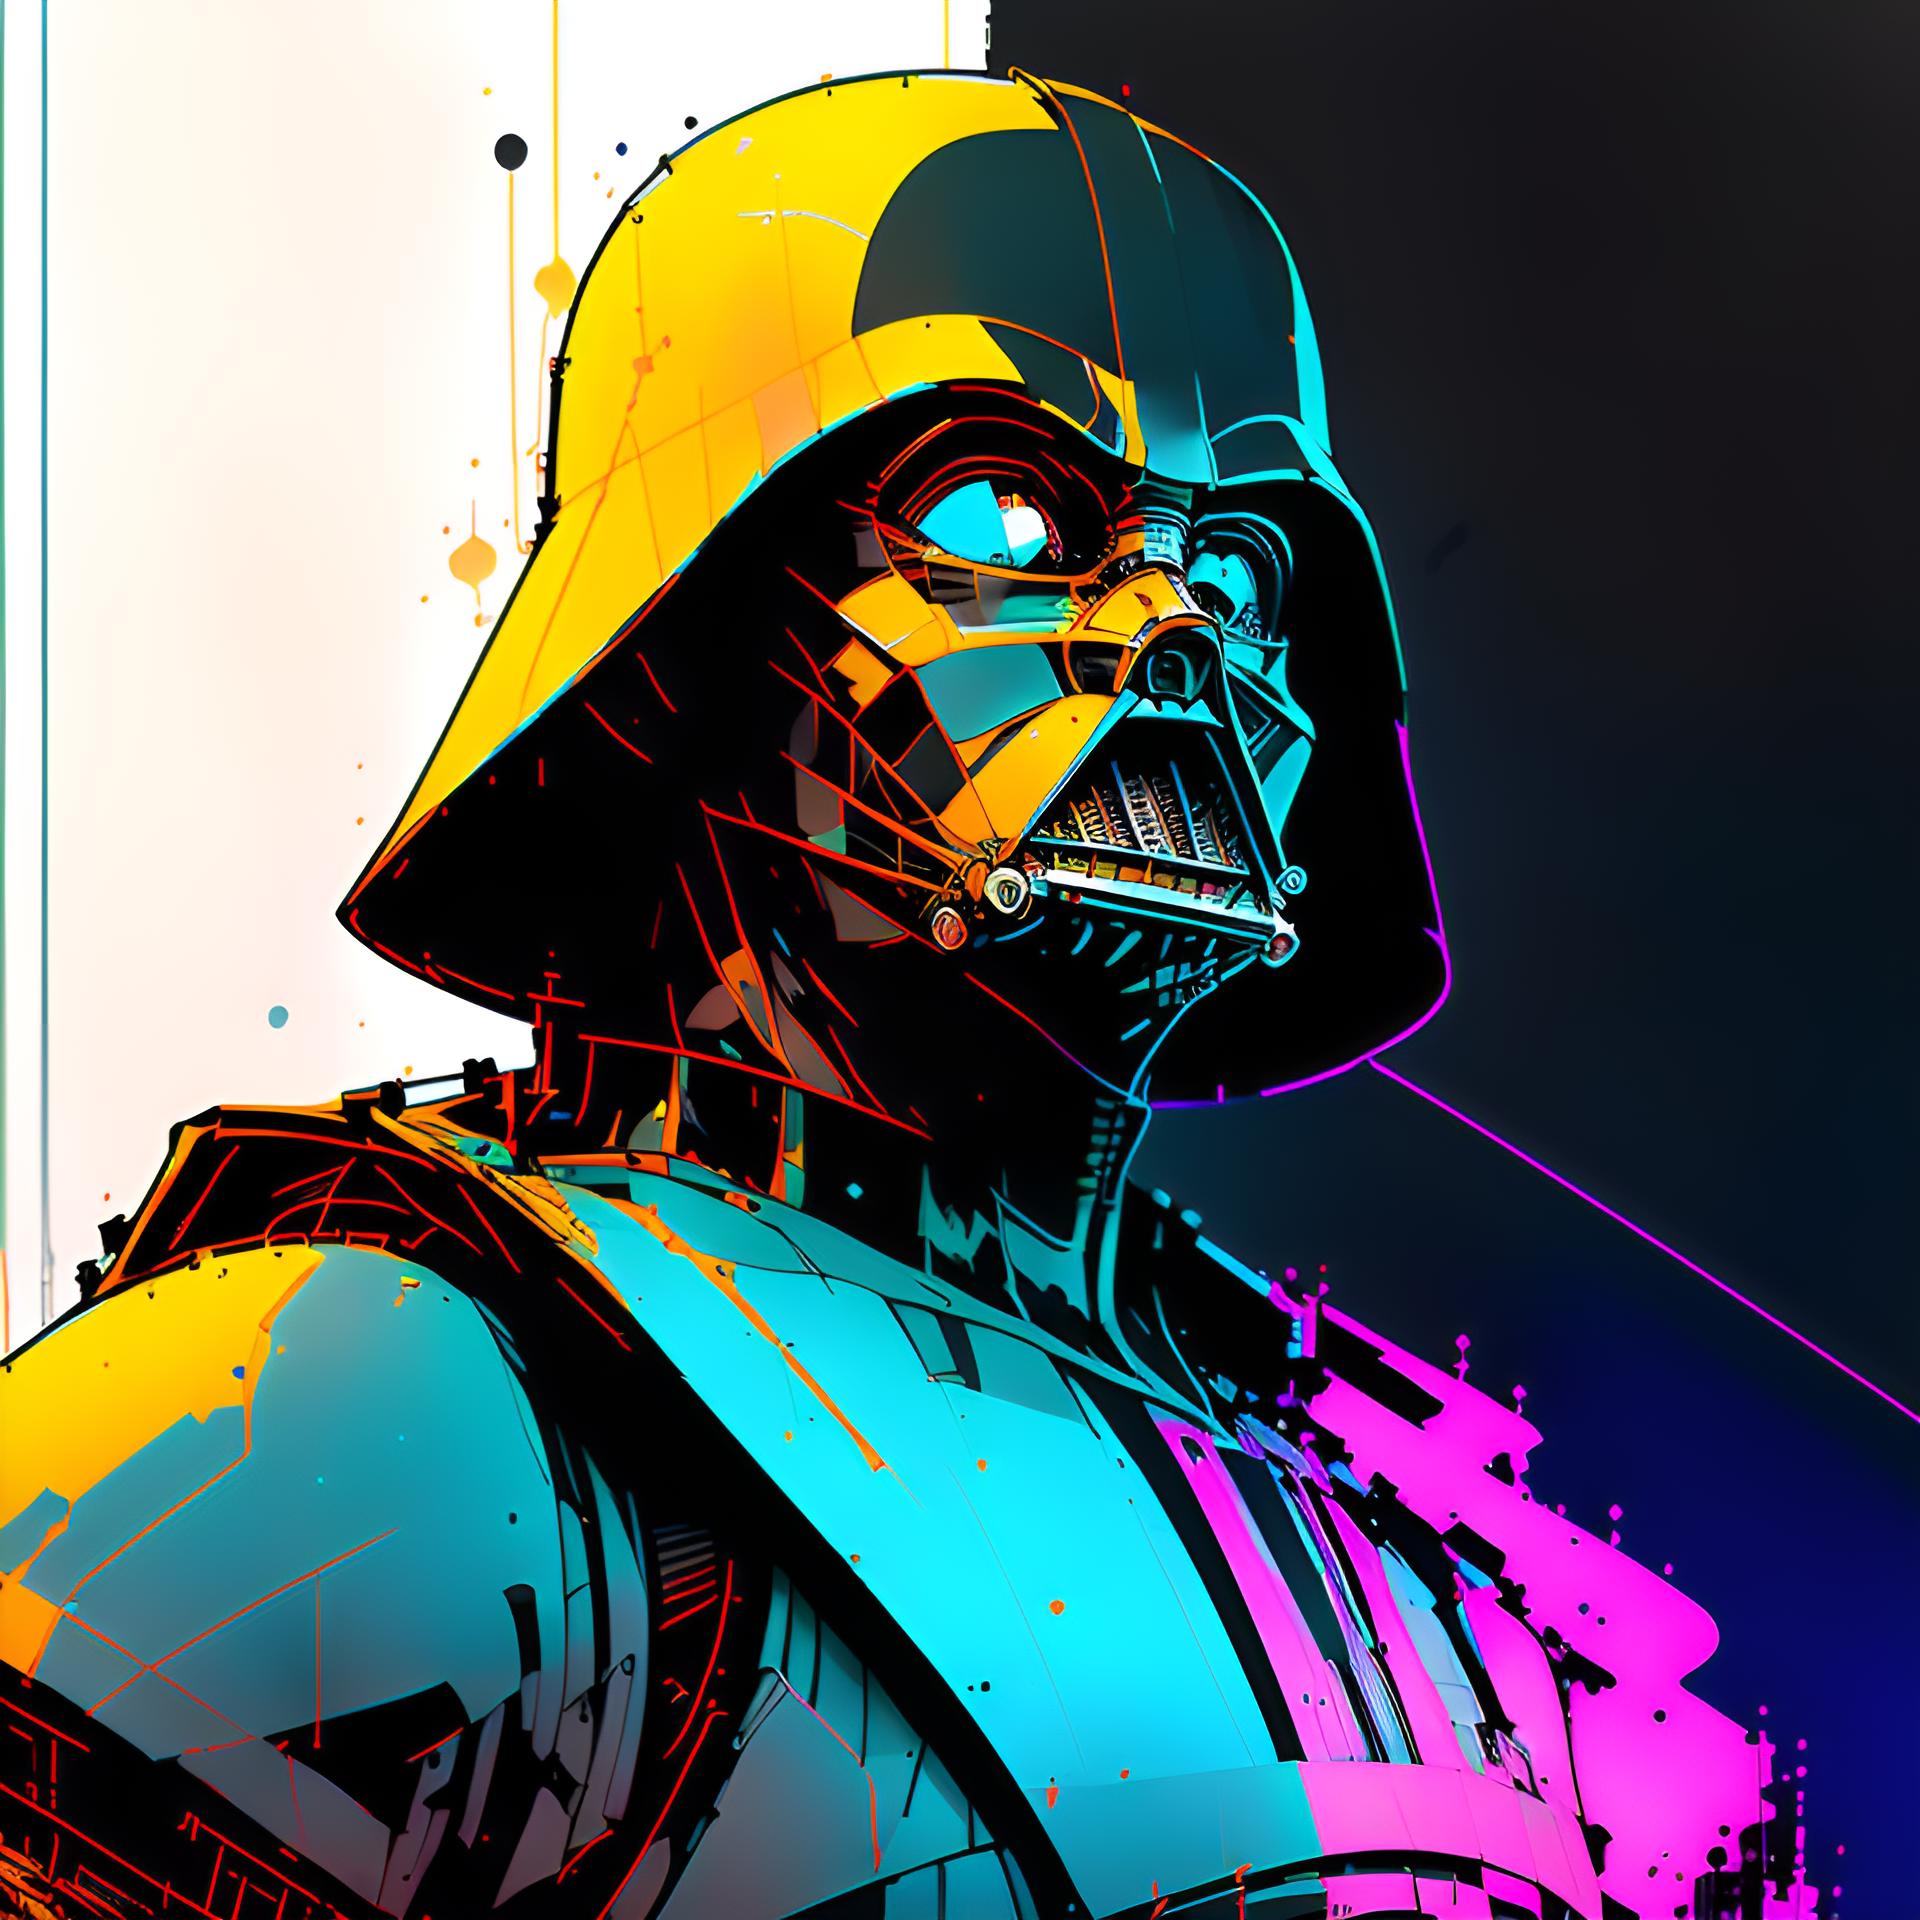 A colorful and detailed drawing of an Imperial Stormtrooper from Star Wars.